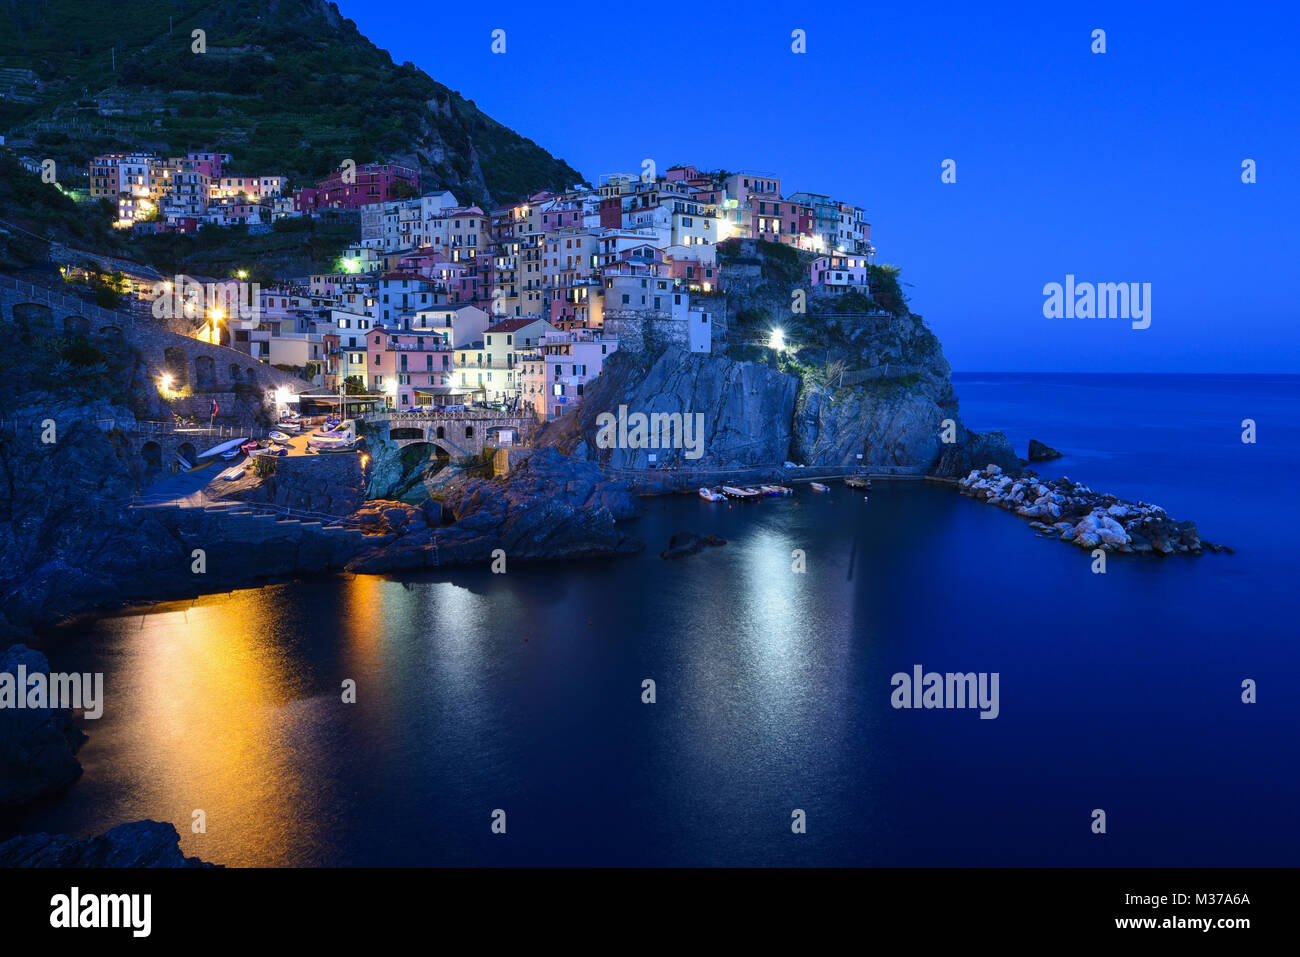 Long exposure of beautiful town of Manarola on the Cinque Terre on the Italian coastline at blue hour after sunset on a clear calm day Stock Photo